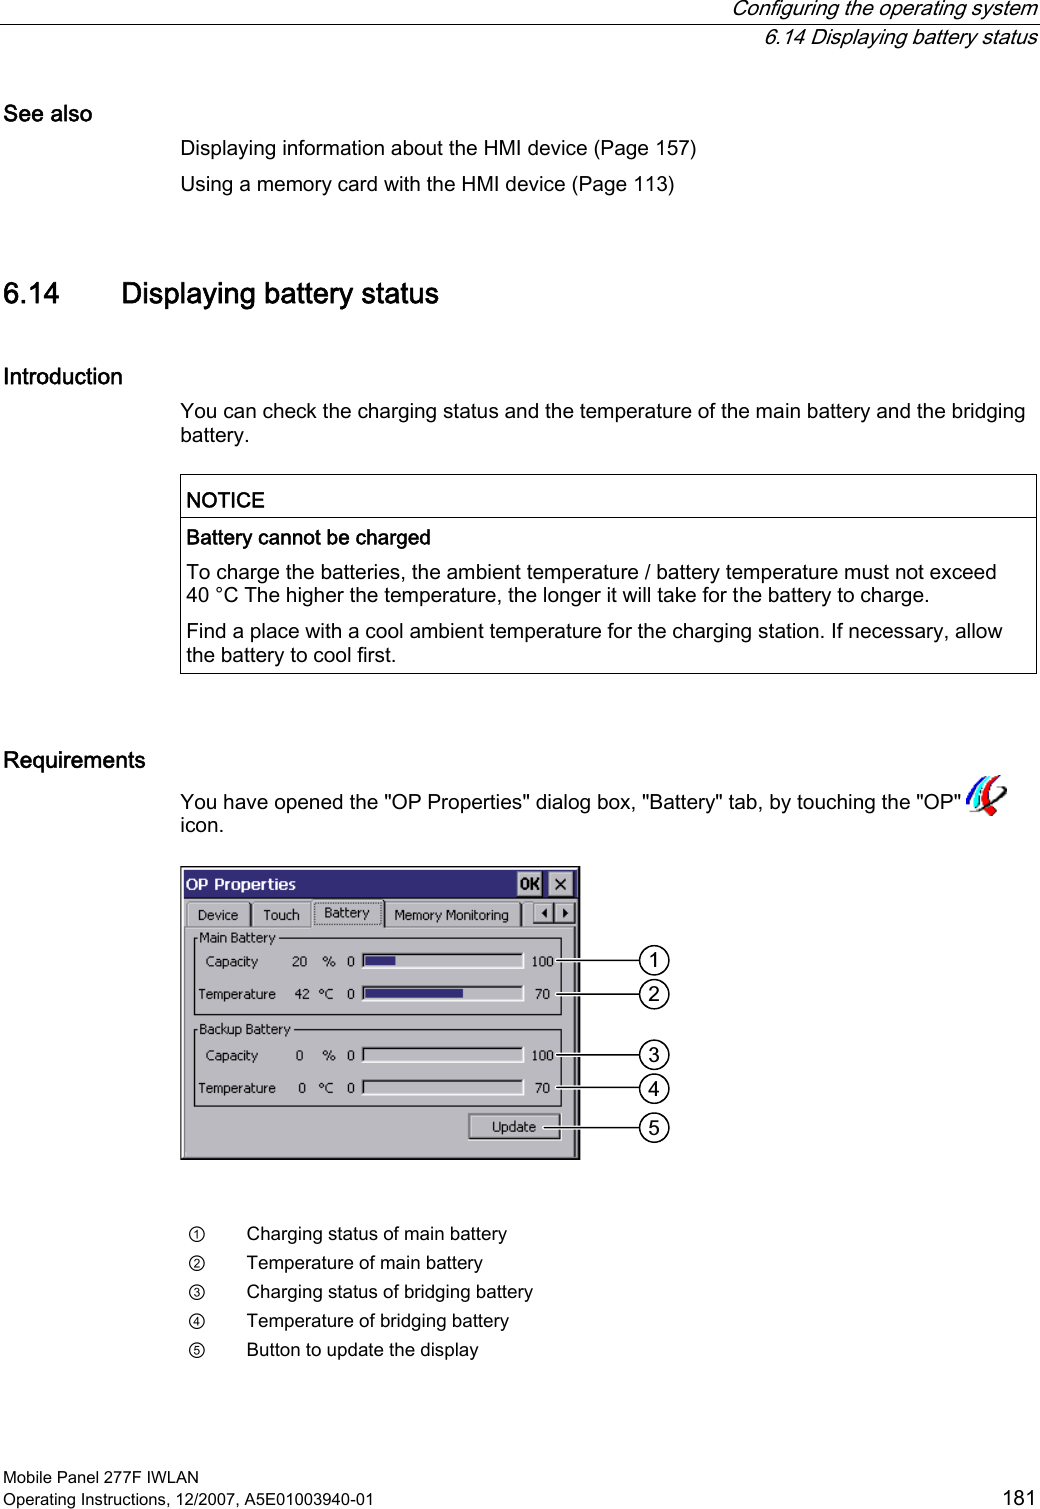  Configuring the operating system  6.14 Displaying battery status Mobile Panel 277F IWLAN Operating Instructions, 12/2007, A5E01003940-01  181 See also Displaying information about the HMI device (Page 157) Using a memory card with the HMI device (Page 113) 6.14 Displaying battery status Introduction You can check the charging status and the temperature of the main battery and the bridging battery.  NOTICE  Battery cannot be charged To charge the batteries, the ambient temperature / battery temperature must not exceed 40 °C The higher the temperature, the longer it will take for the battery to charge.  Find a place with a cool ambient temperature for the charging station. If necessary, allow the battery to cool first.  Requirements You have opened the &quot;OP Properties&quot; dialog box, &quot;Battery&quot; tab, by touching the &quot;OP&quot;   icon.    ①  Charging status of main battery ②  Temperature of main battery ③  Charging status of bridging battery ④  Temperature of bridging battery ⑤  Button to update the display 